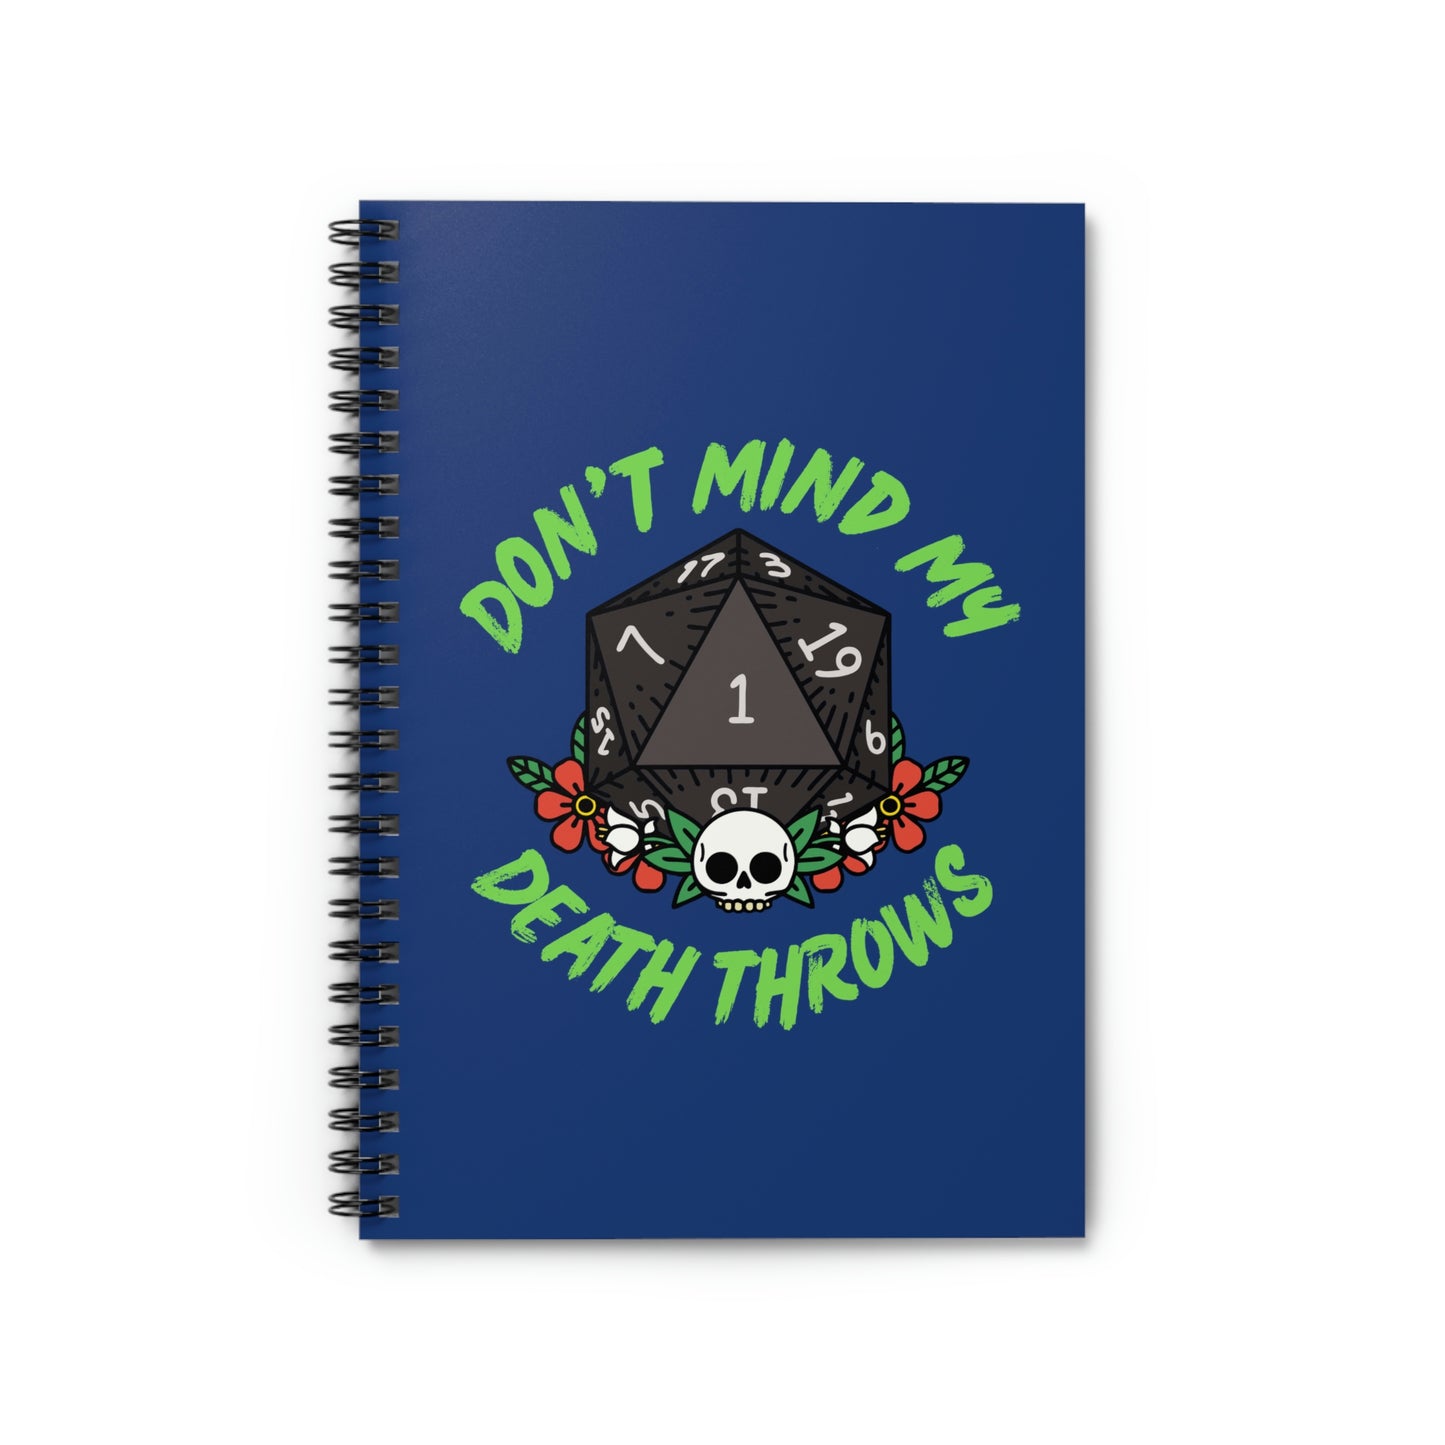 Death Throws Spiral Notebook - Ruled Line